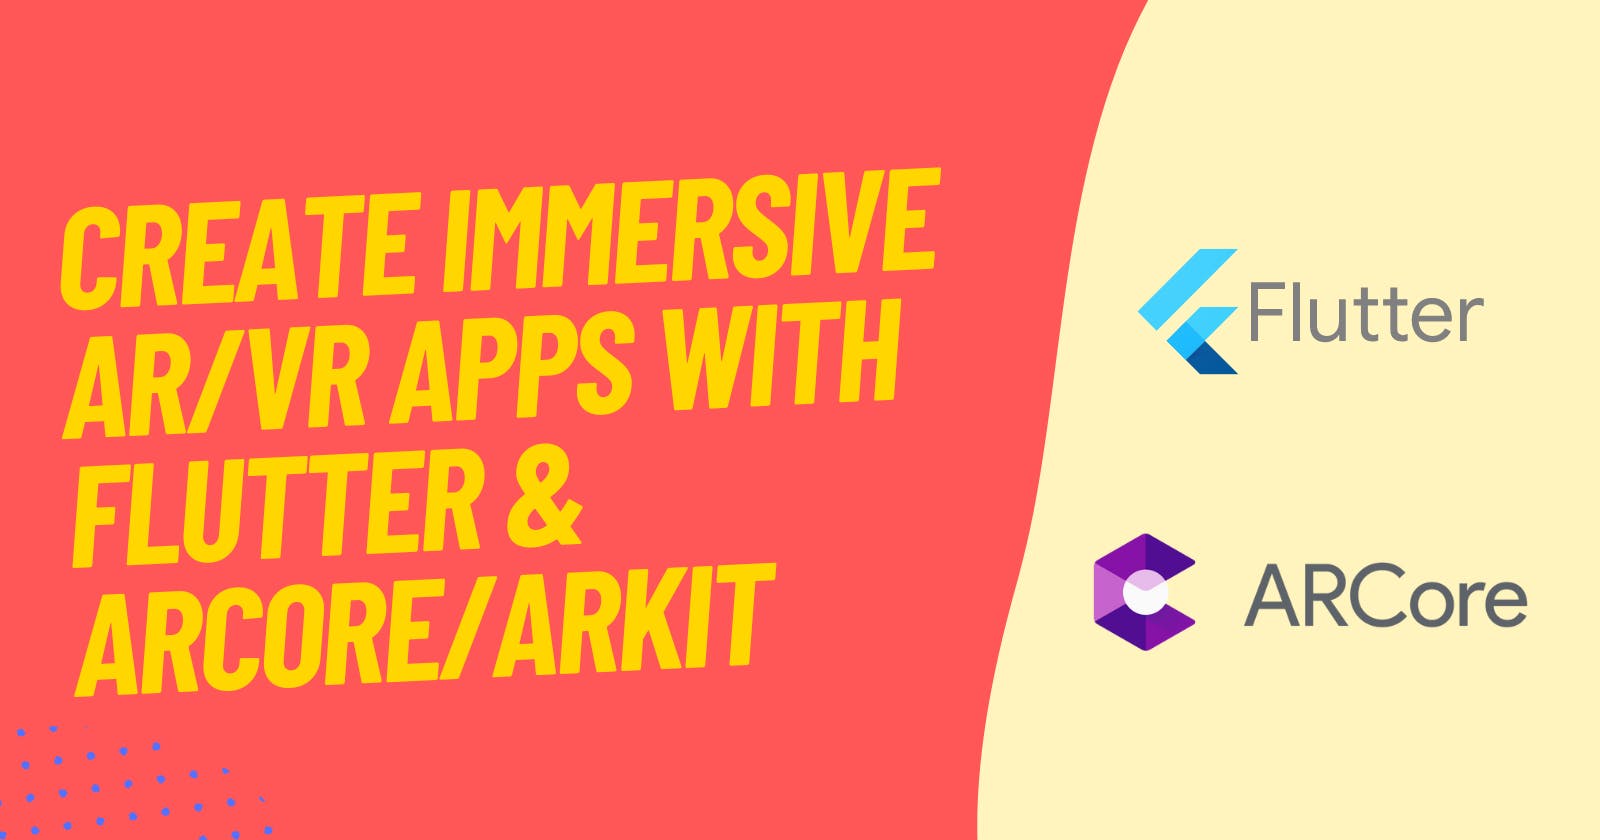 Flutter and AR/VR: How to Build Immersive Experiences with Flutter